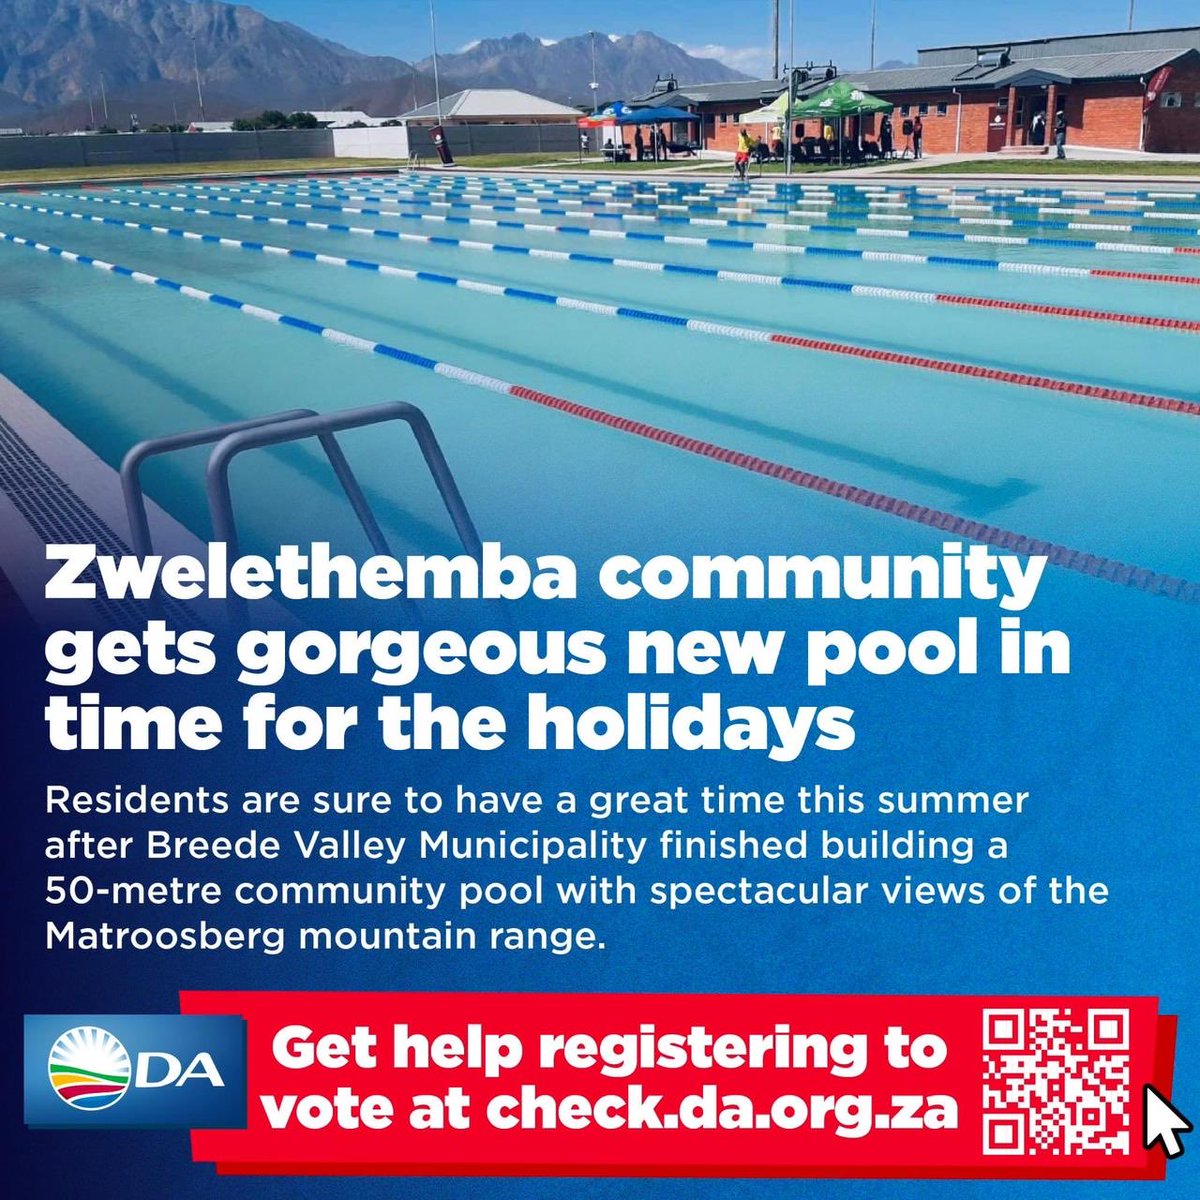 🏊‍♂️ Under the leadership of the DA Mayor, Antoinette Steyn, Breede Valley built a 50-metre pool to ensure the Zwelethemba community has access to it just in time for summer.

Let's rescue SA and bring change, visit check.da.org.za.

#PowerToTheRegistered
#RegisterToVoteDA